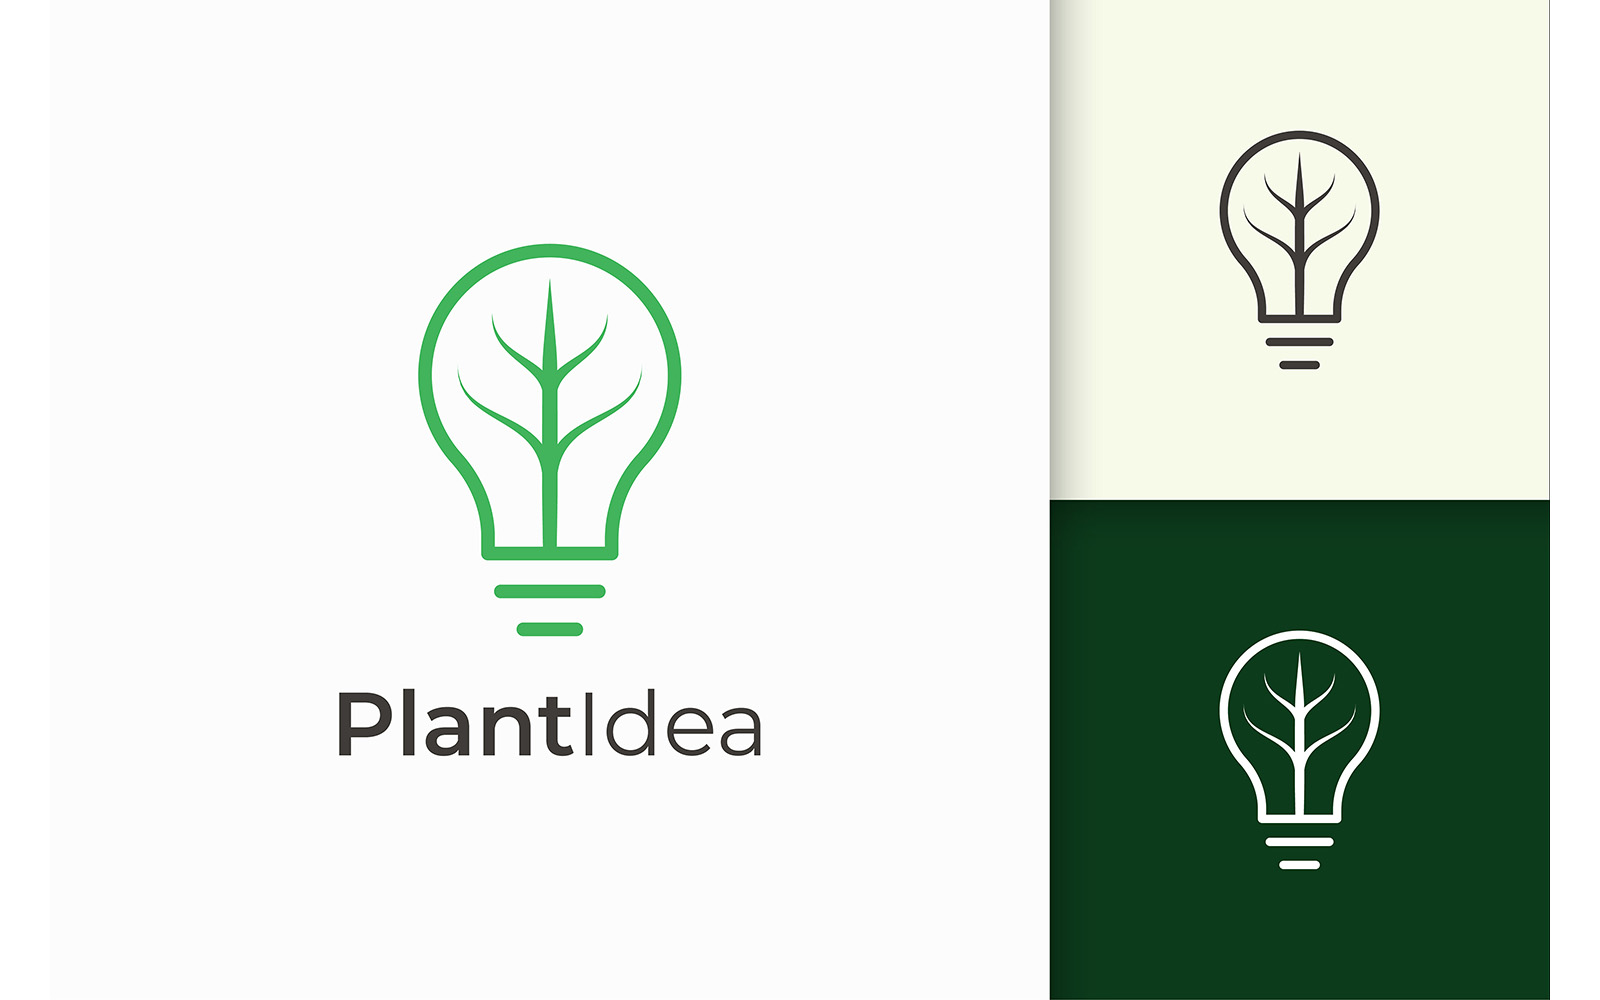 Light Bulb and Leaf Logo in Modern Style